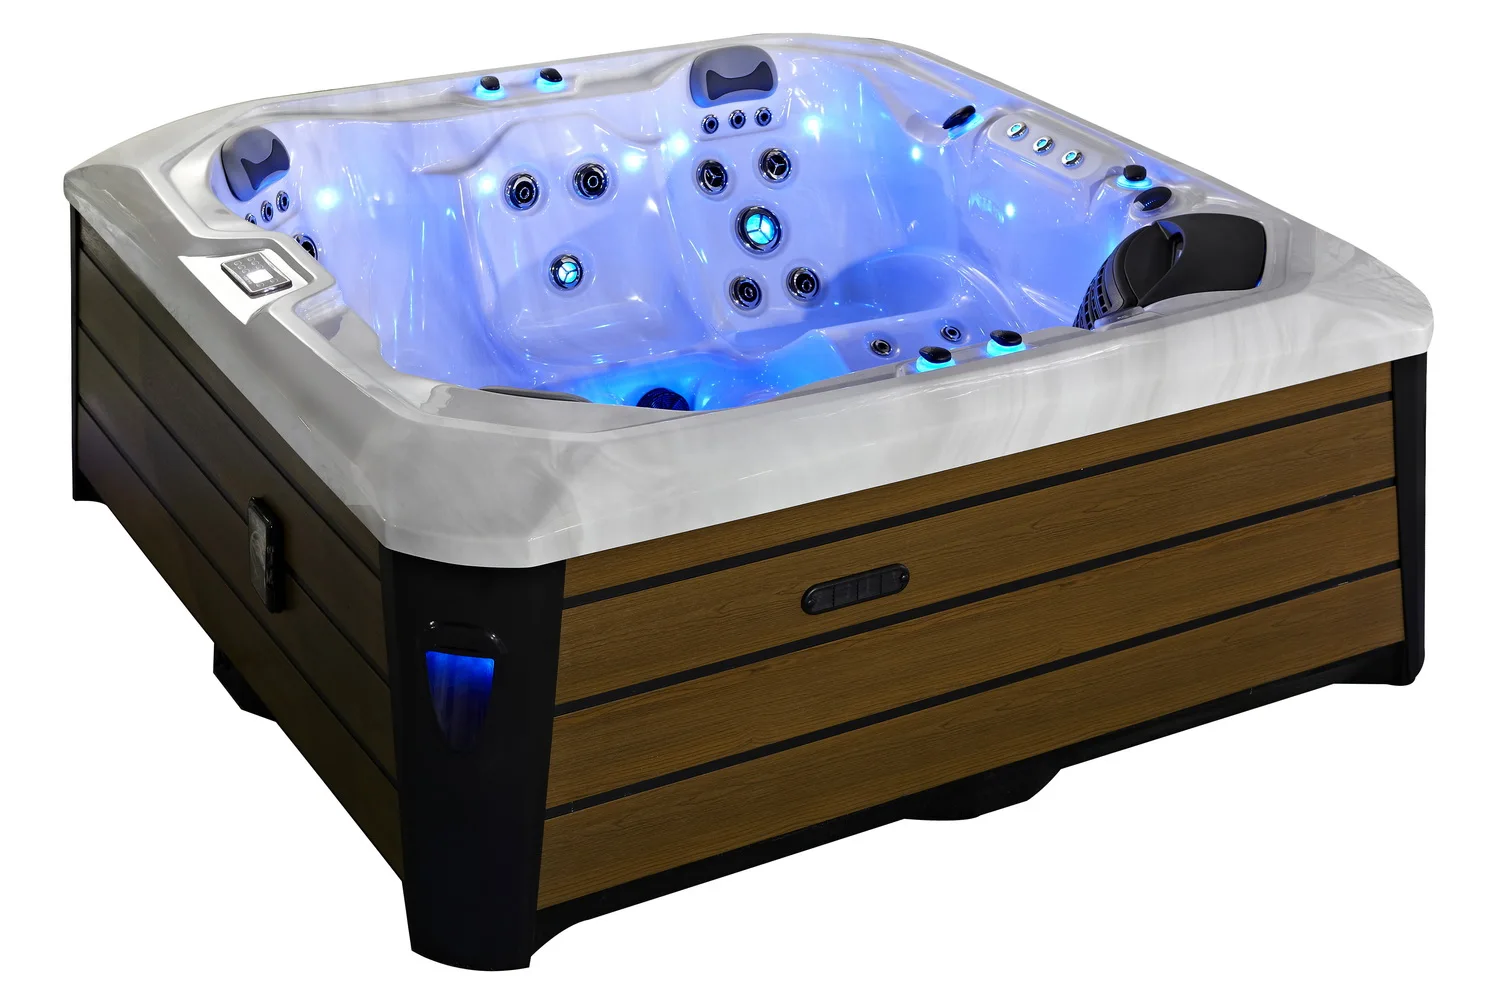 Sunrans Ce Approved Balboa System 49 Pcs Massage Jet Outdoor Balboa Hot Tubs Spas Buy Outdoor